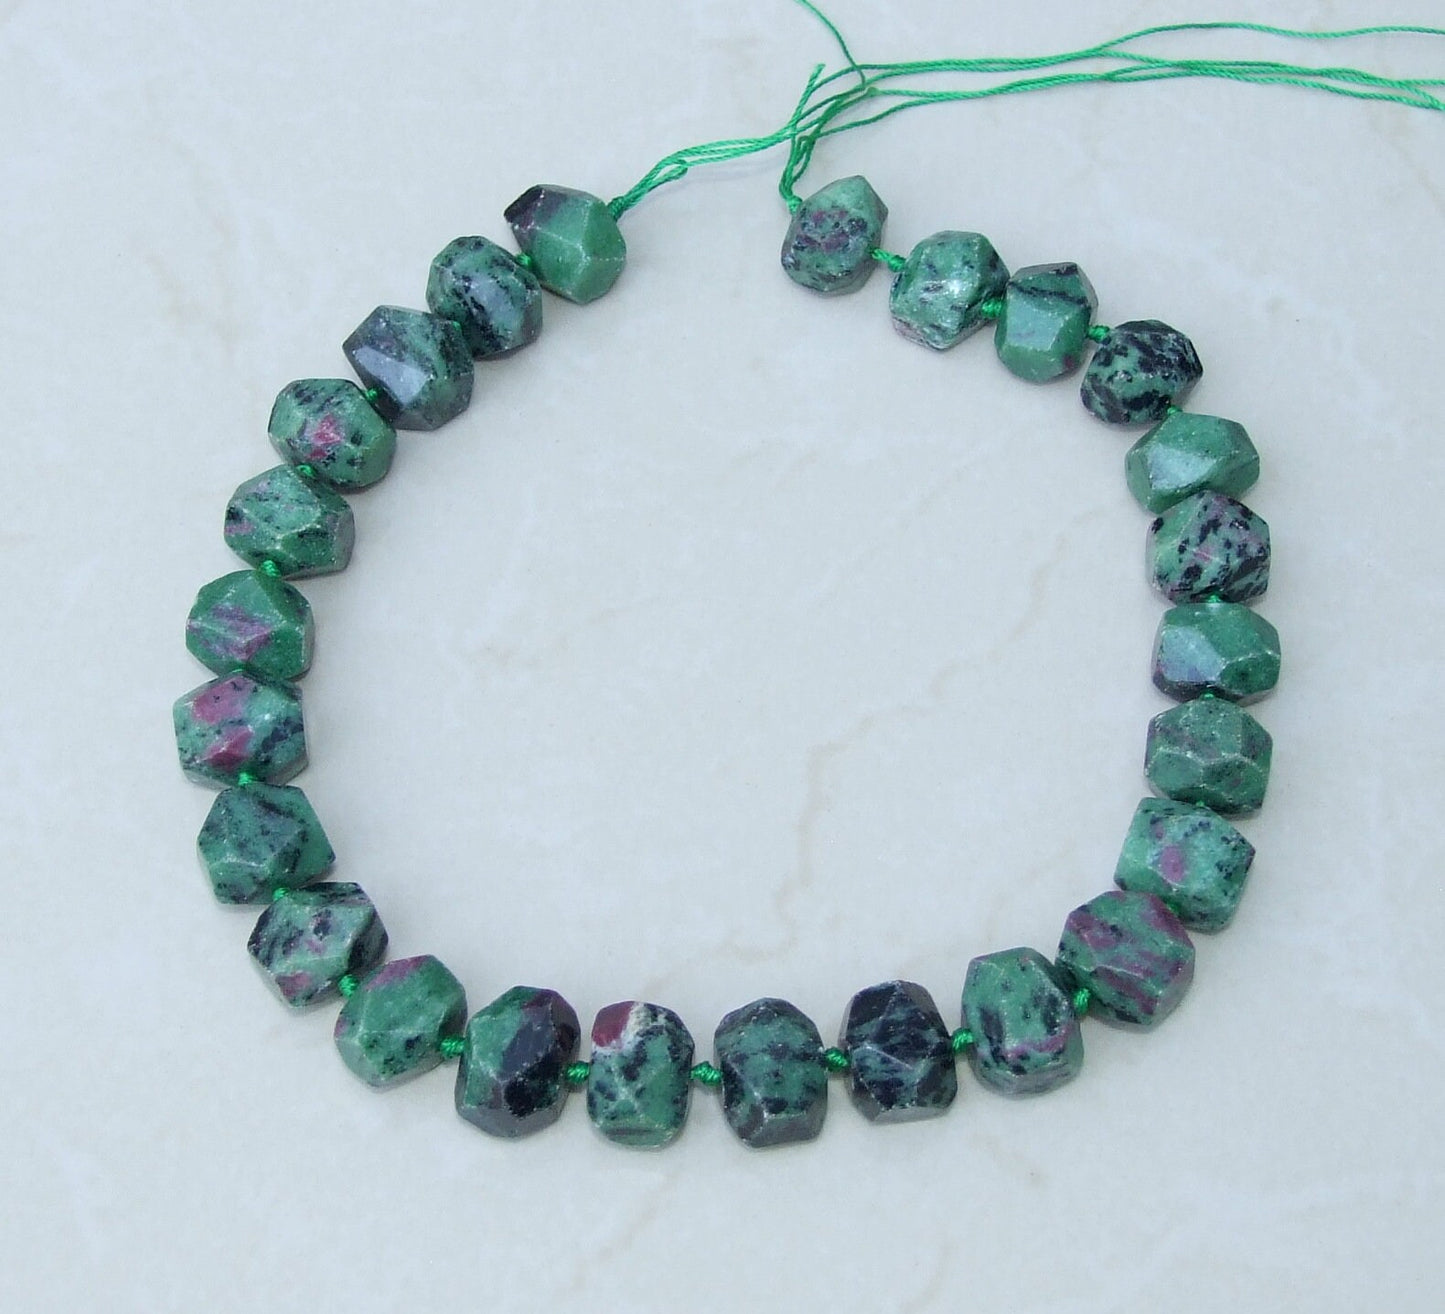 Ruby Zoisite Faceted Nugget, Ruby Zoisite Pendant, Gemstone Beads, Jewelry Stones, Ruby Zoisite Beads, Half Strand, 14mm x 14mm x 17mm